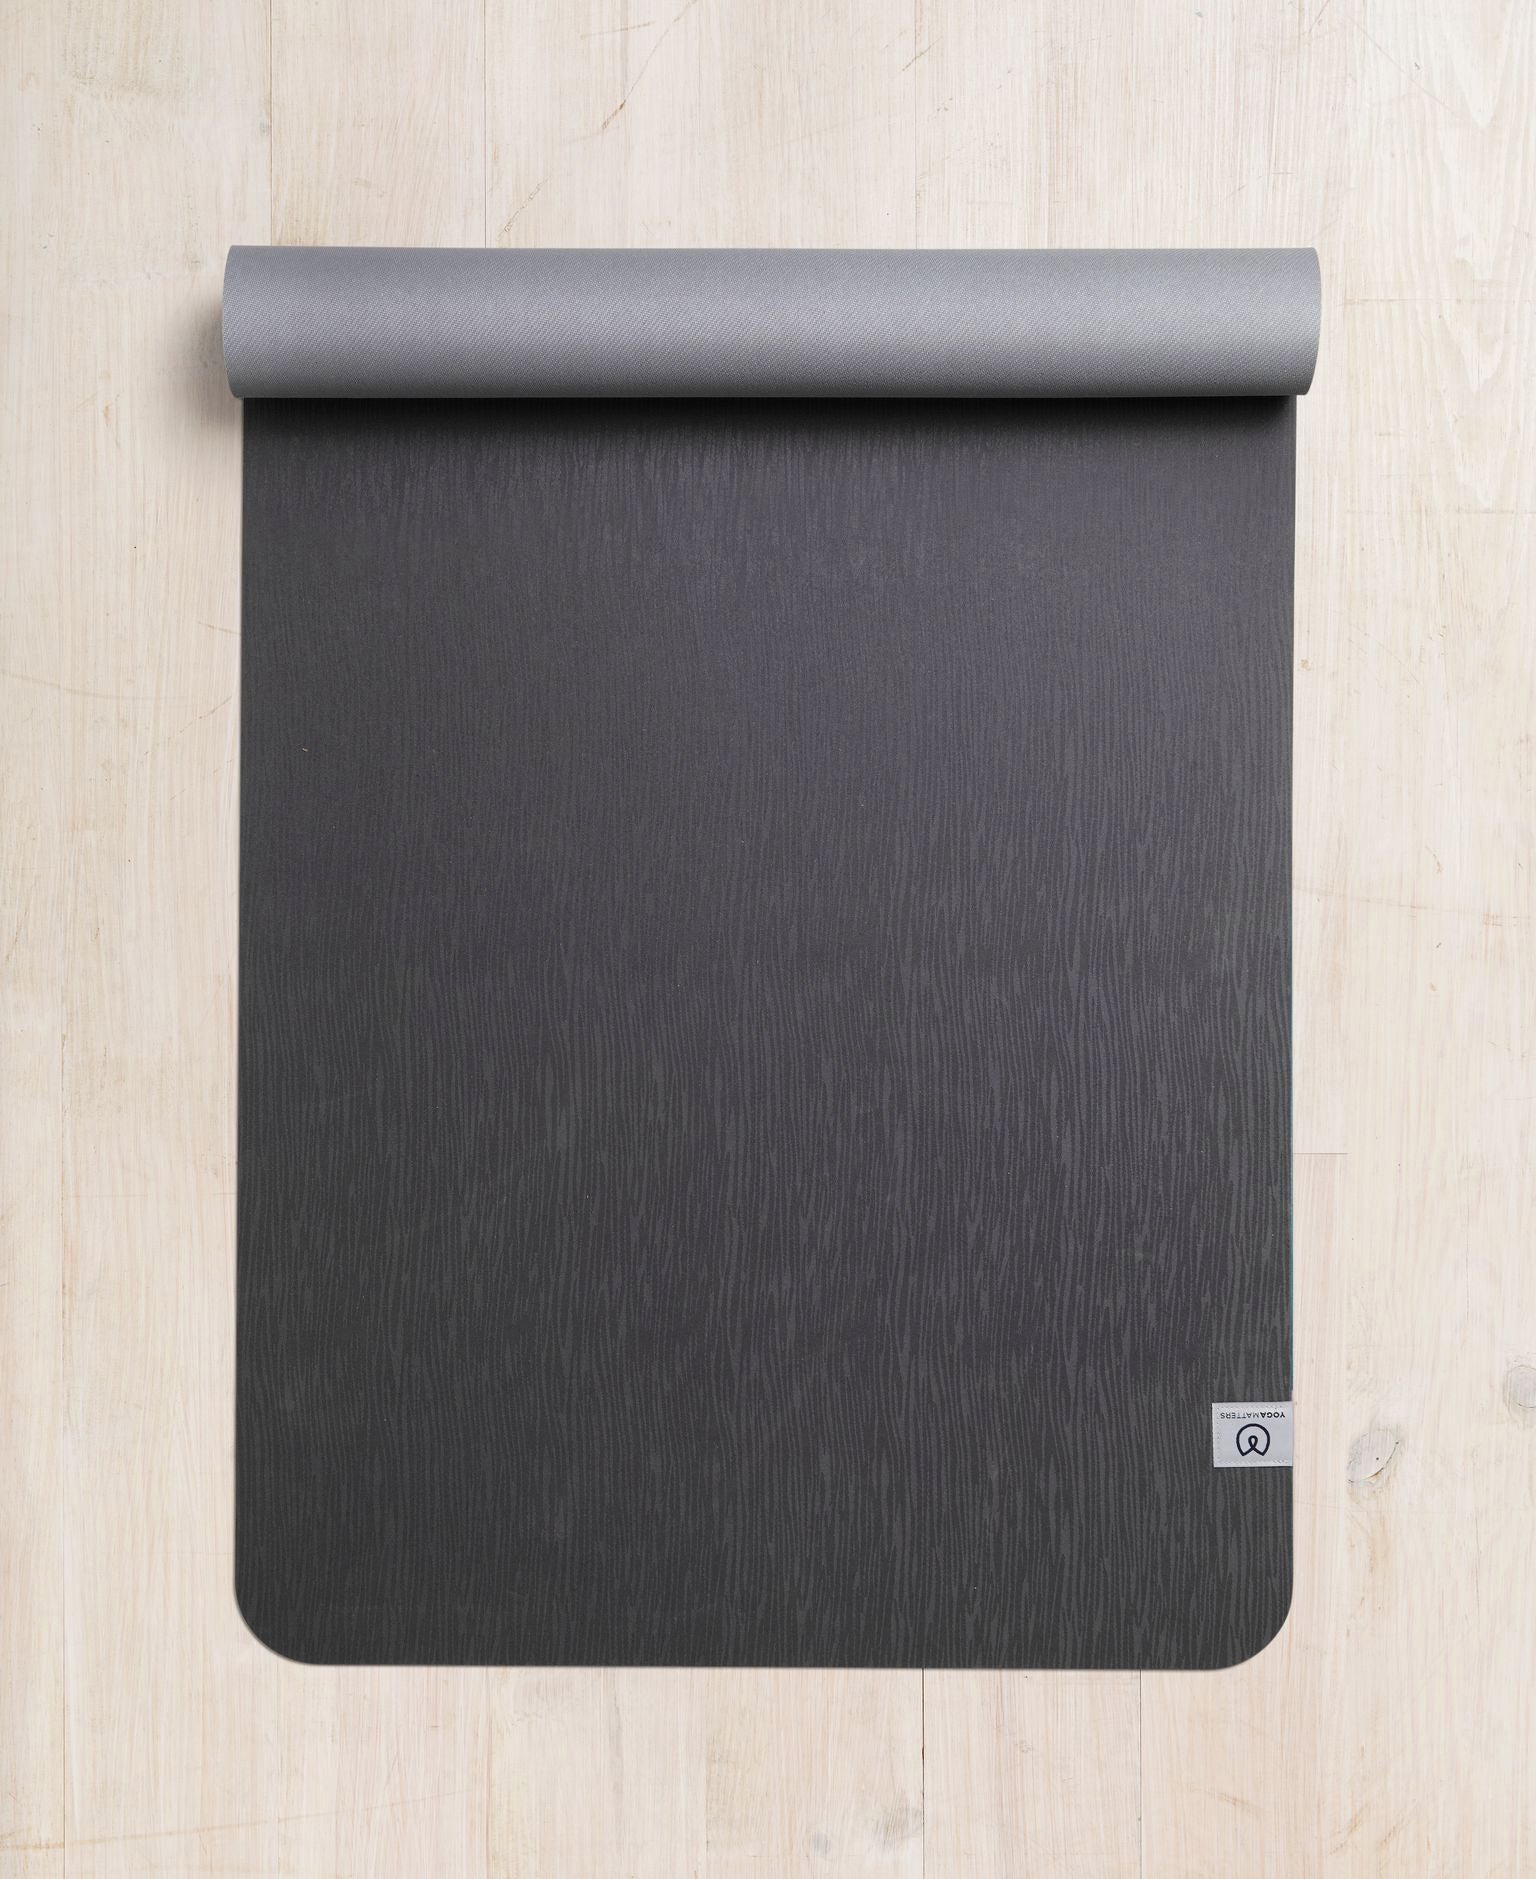 Top view of a rolled dark gray yoga mat with textured design on a wooden floor, eco-friendly materials, non-slip surface, fitness and wellness accessory.